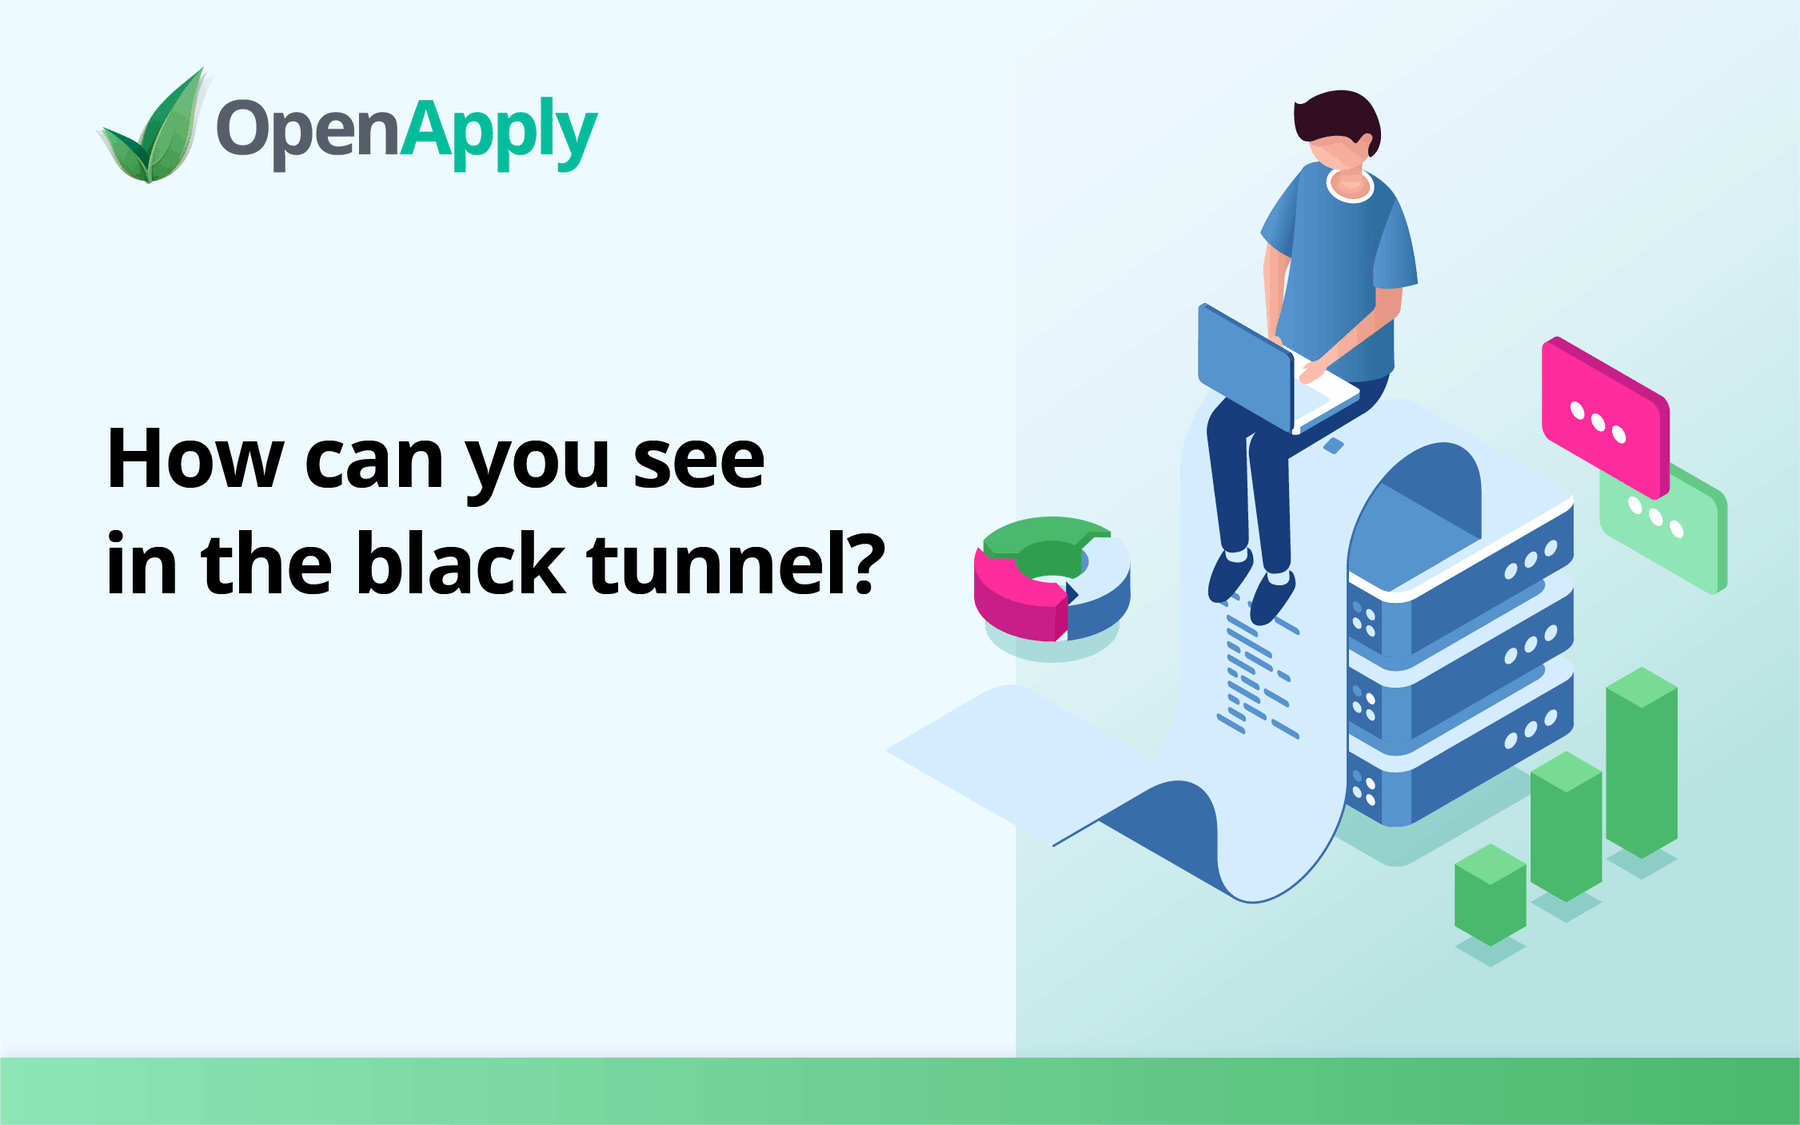 How can you see in the black tunnel?